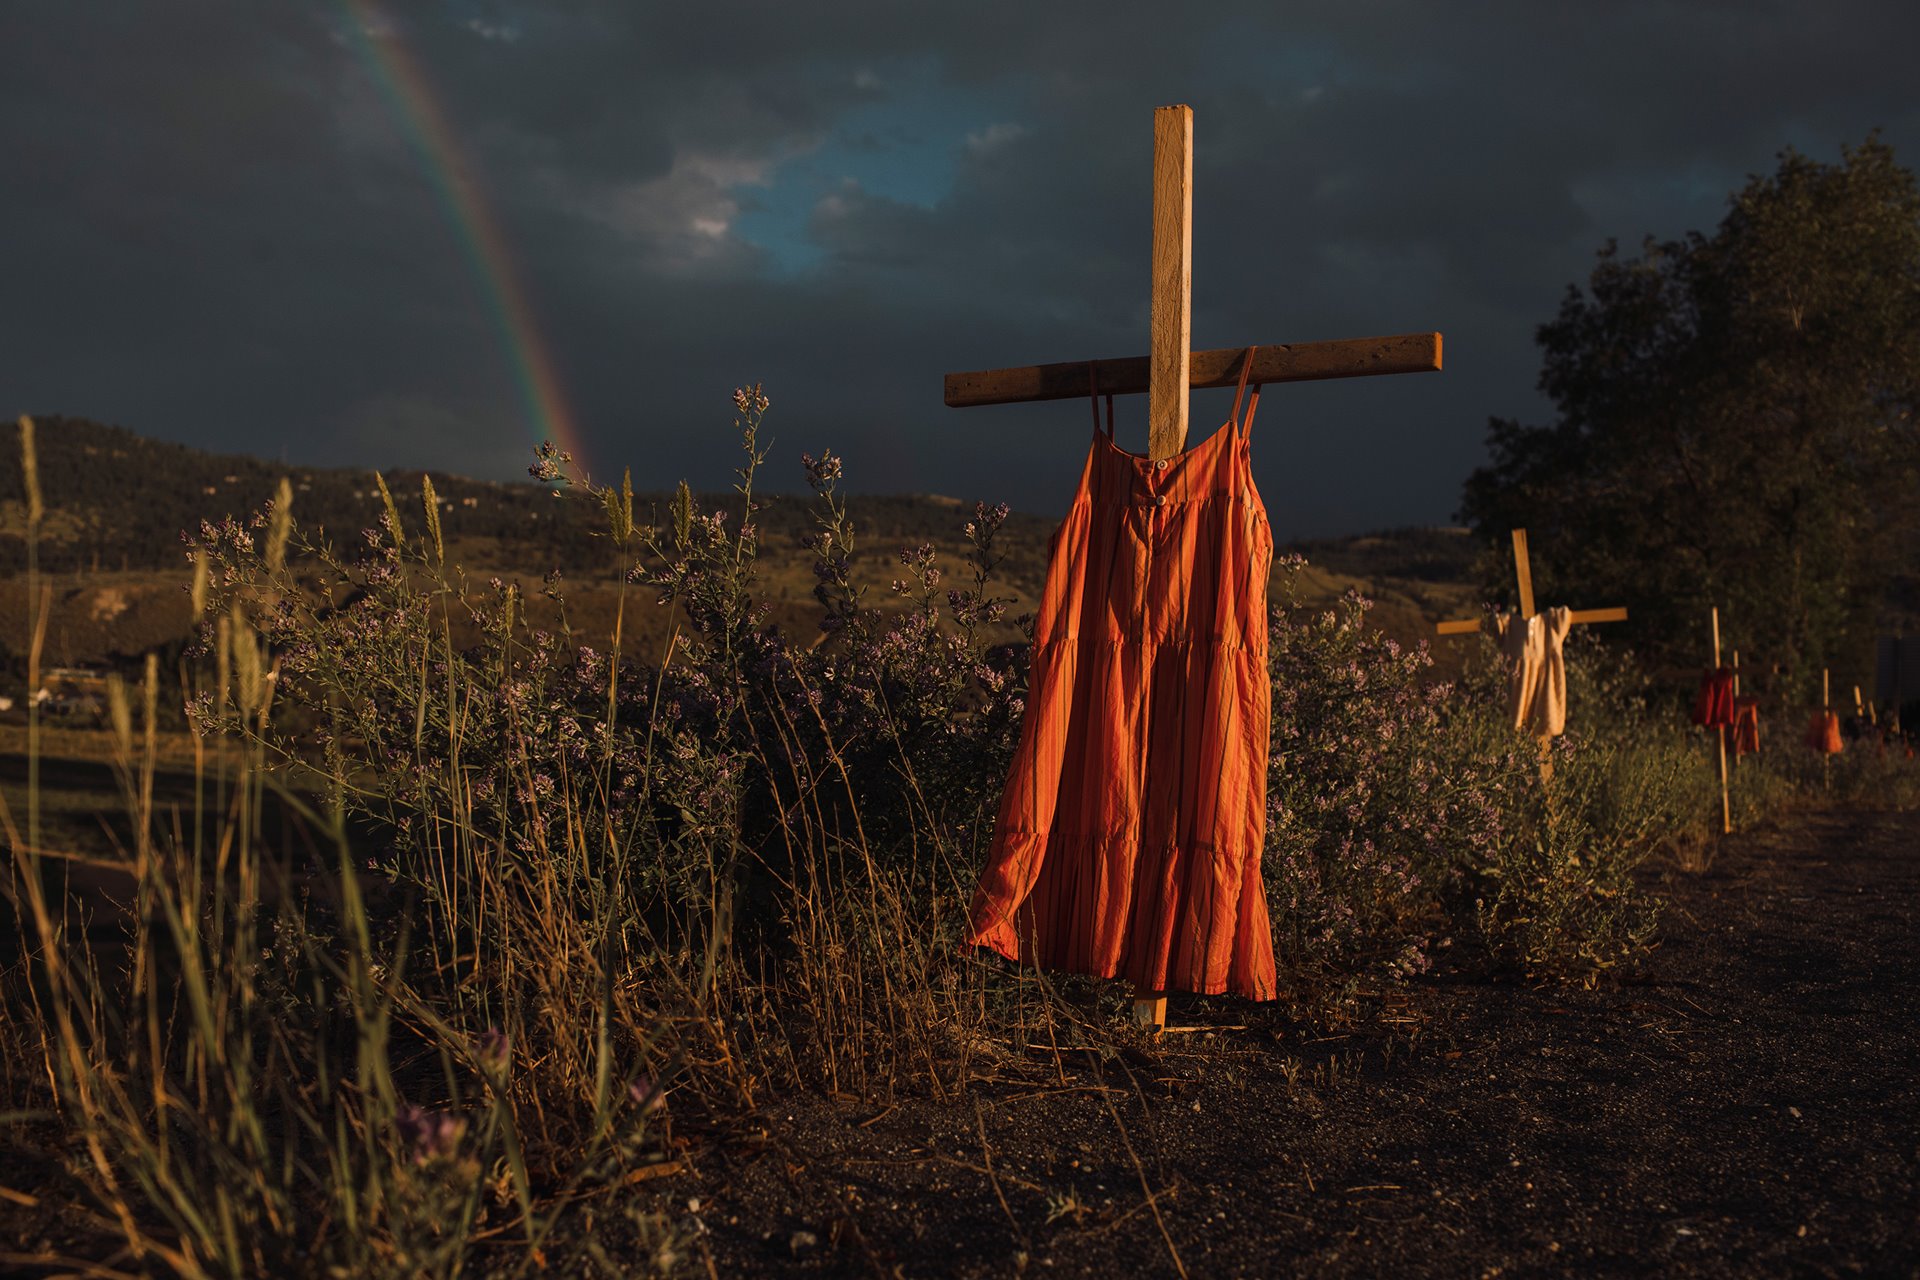 Red dresses hung on crosses along a roadside commemorate children who died at the Kamloops Indian Residential School, an institution created to assimilate Indigenous children, following the detection of as many as 215 unmarked graves, Kamloops, British Columbia.